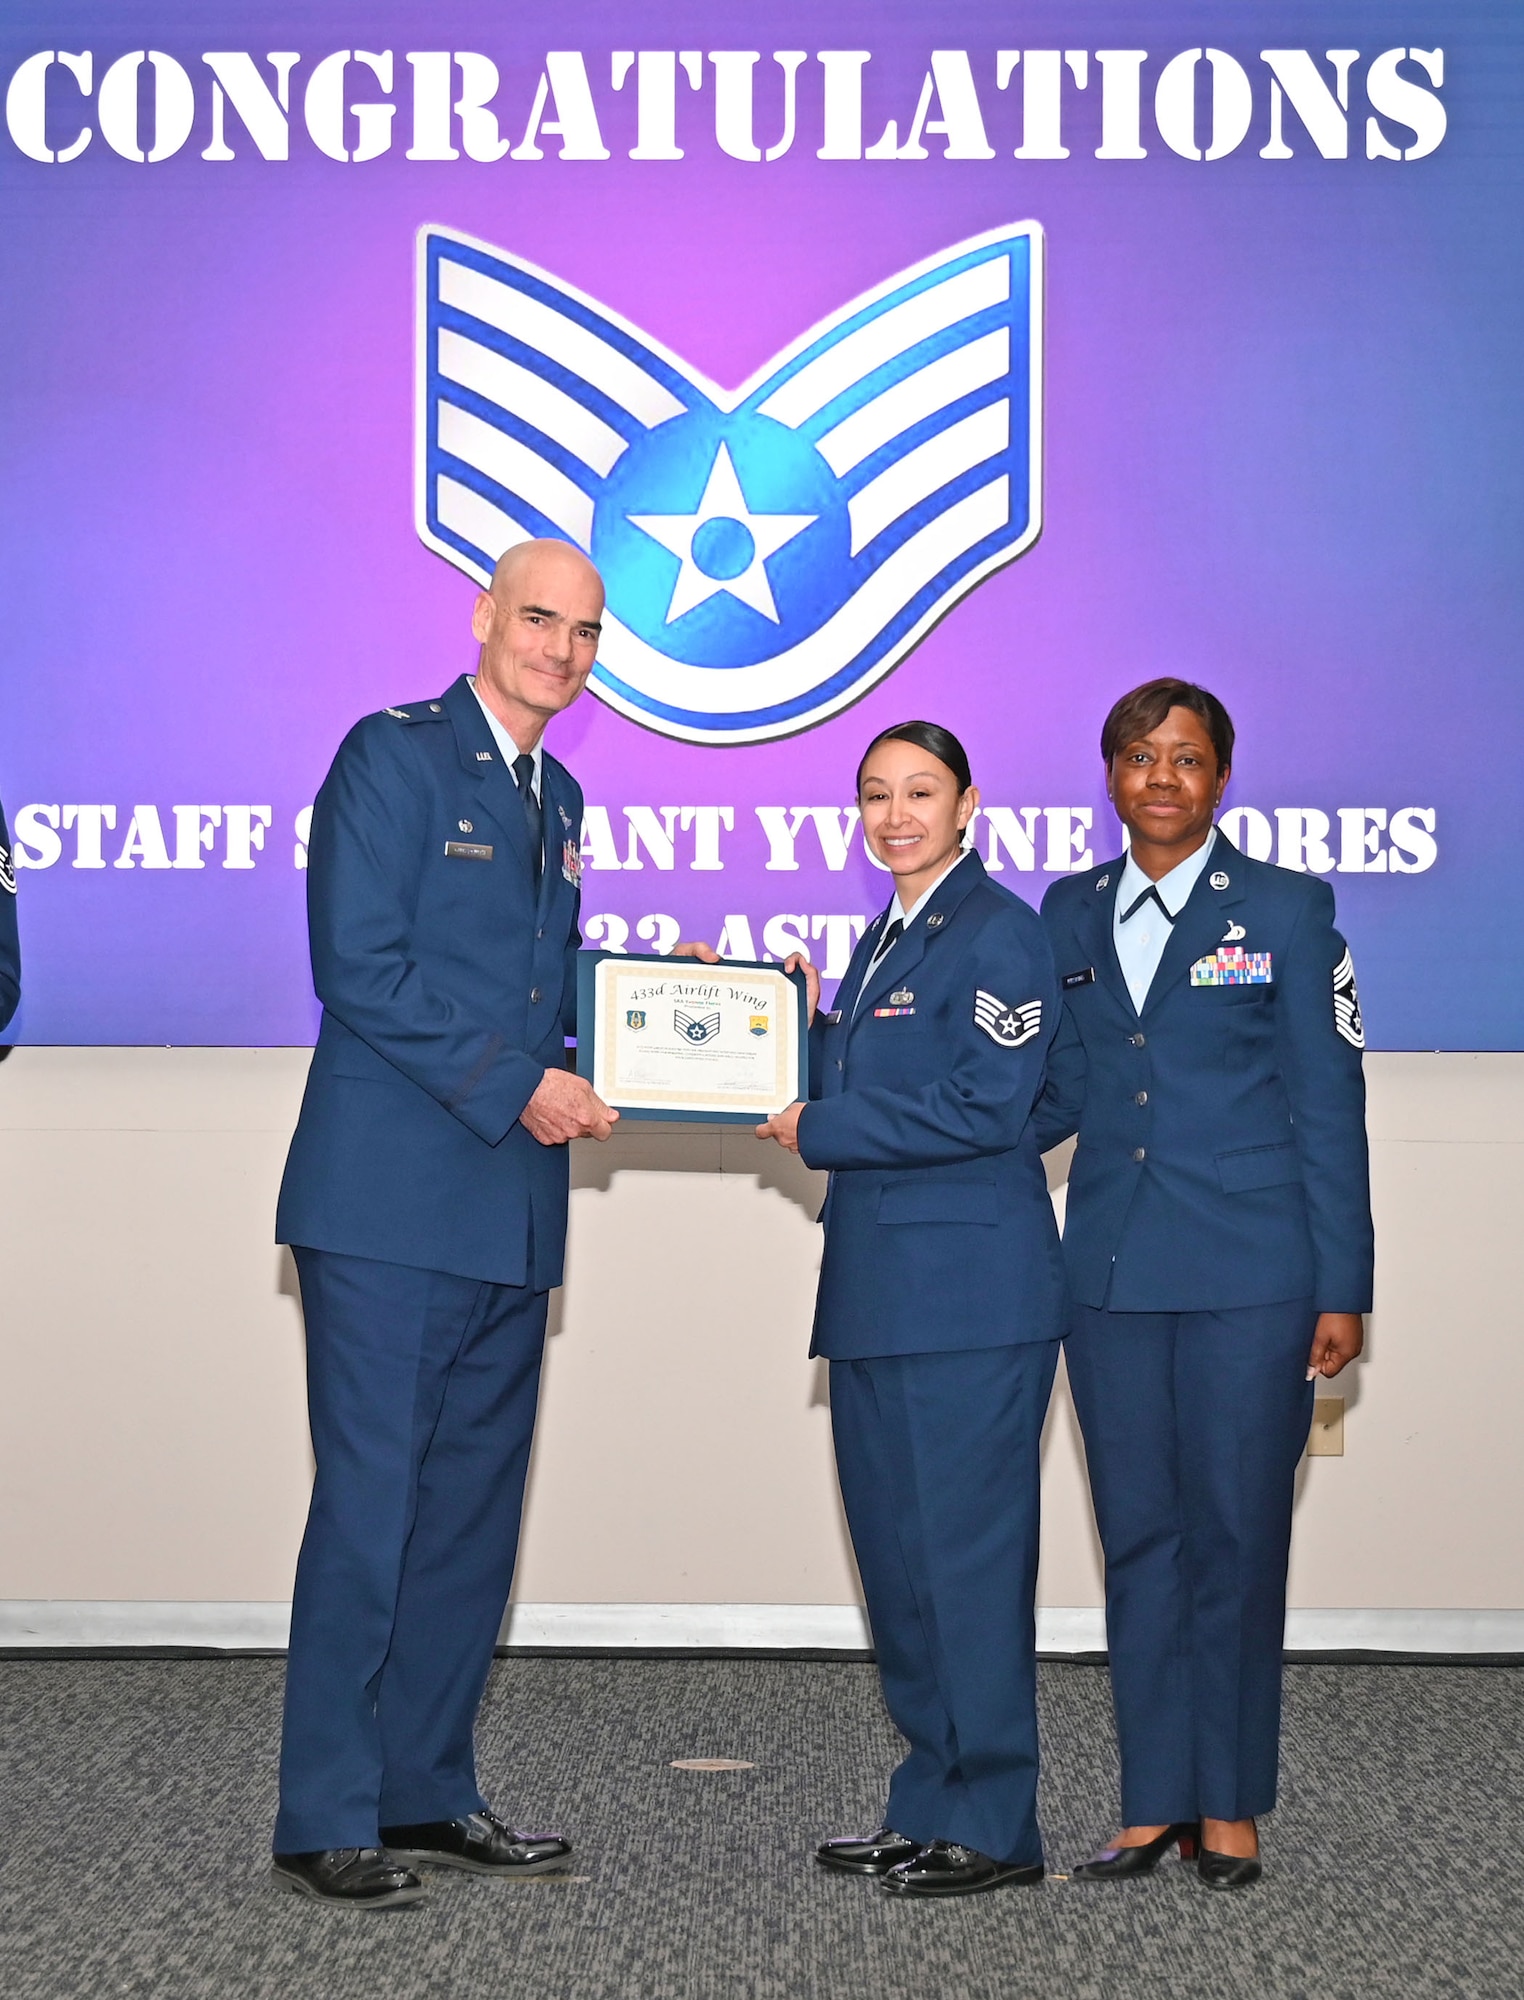 Staff Sgt. Yvonne Flores, 433rd Aeromedical Staging Squadron technician, accepts a certificate of induction from Col. William Gutermuth, 433rd Airlift Wing commander, during an NCO Induction Ceremony October 15, 2023, at Joint Base San Antonio-Lackland, Texas. (U.S. Air Force photo by Master Sgt. Samantha Mathison)